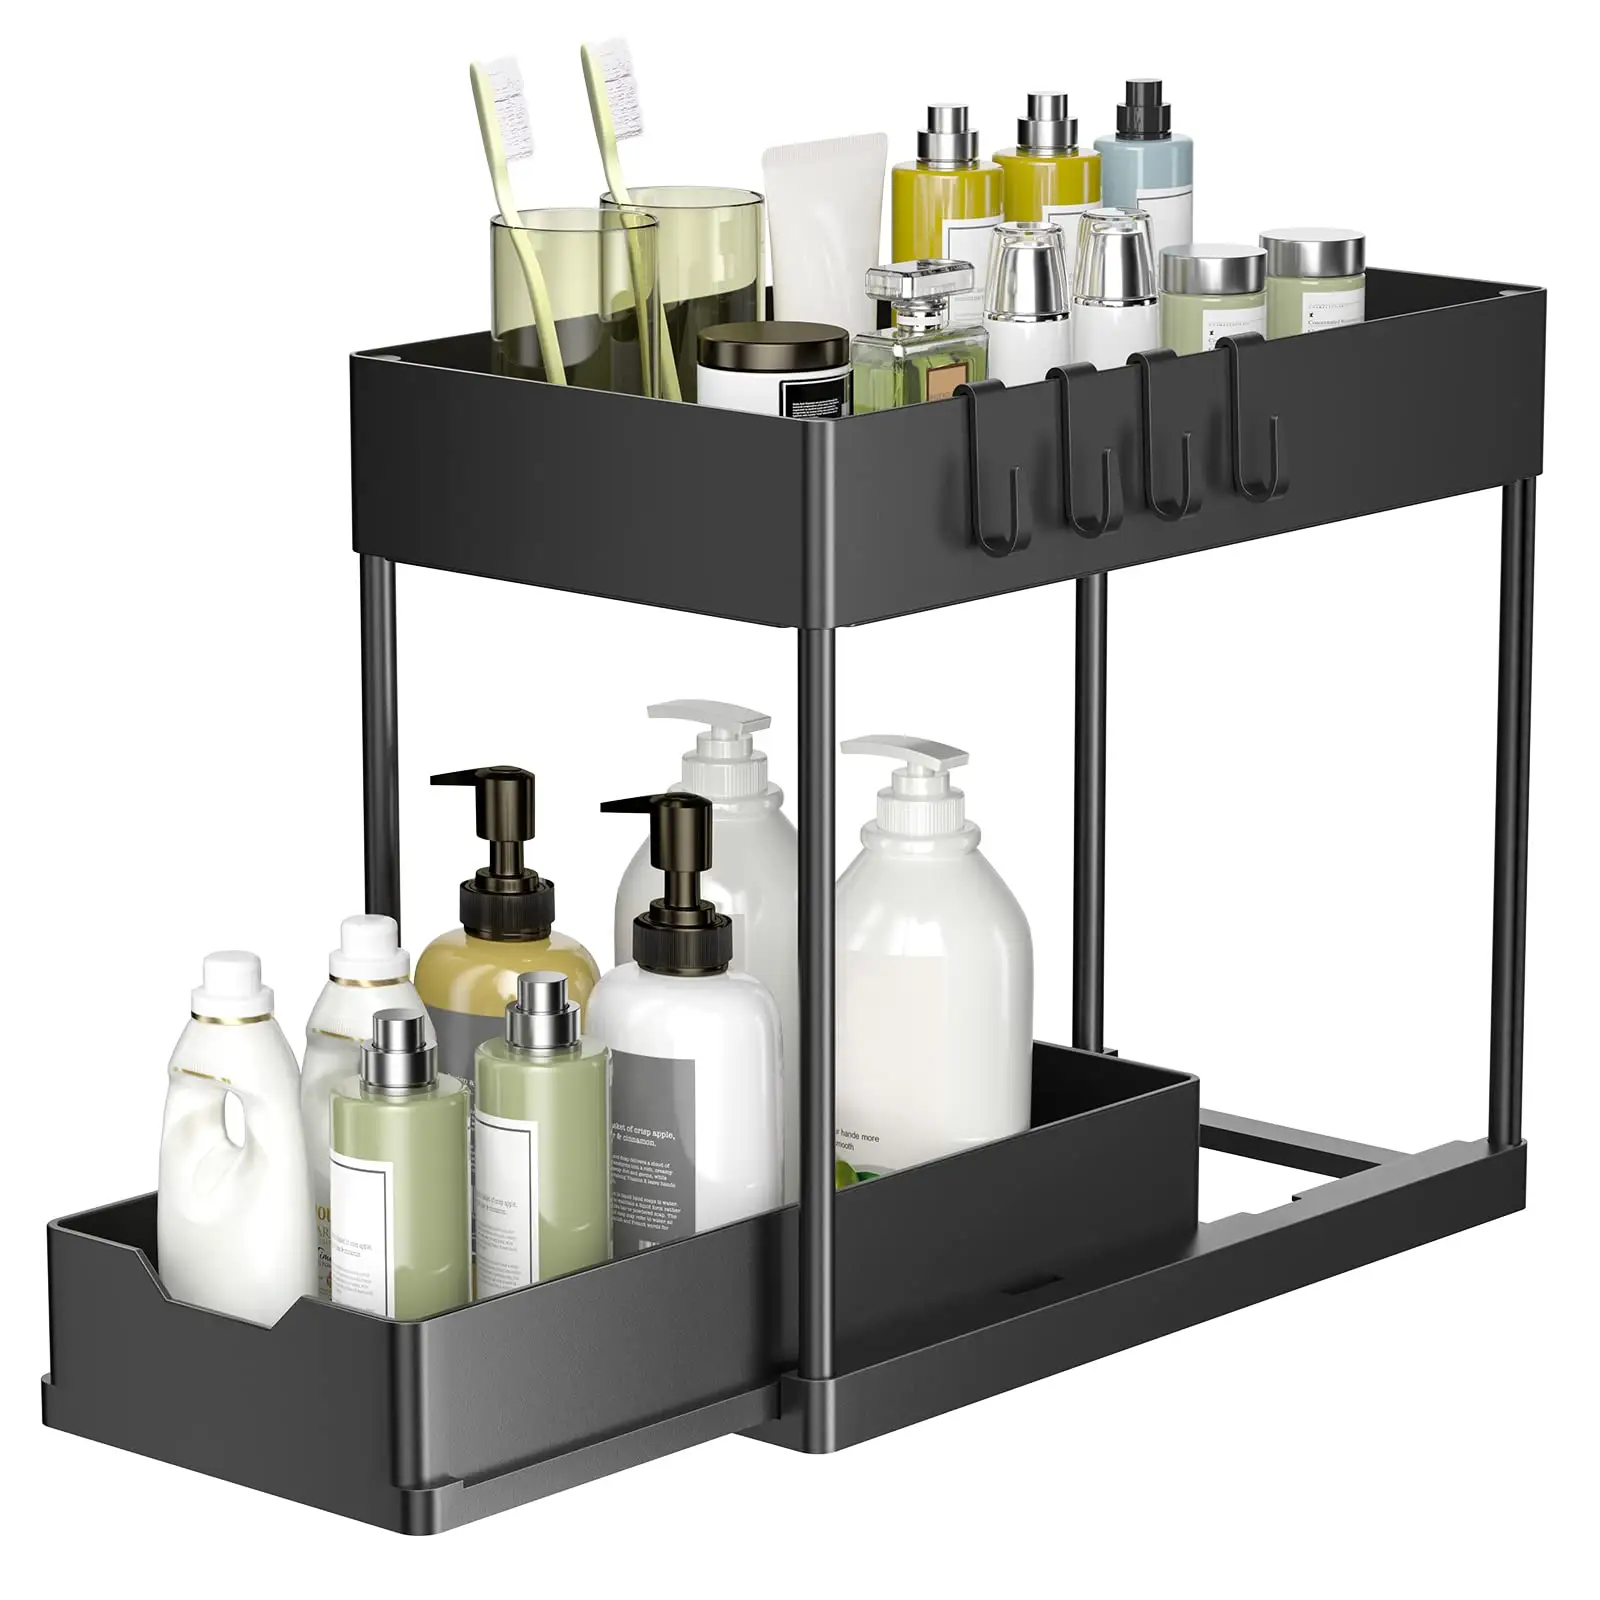 Under Sink Organizers and Storage with Pull Out Drawers, 2 Tier Under Sliding Cabinet Basket Organizer